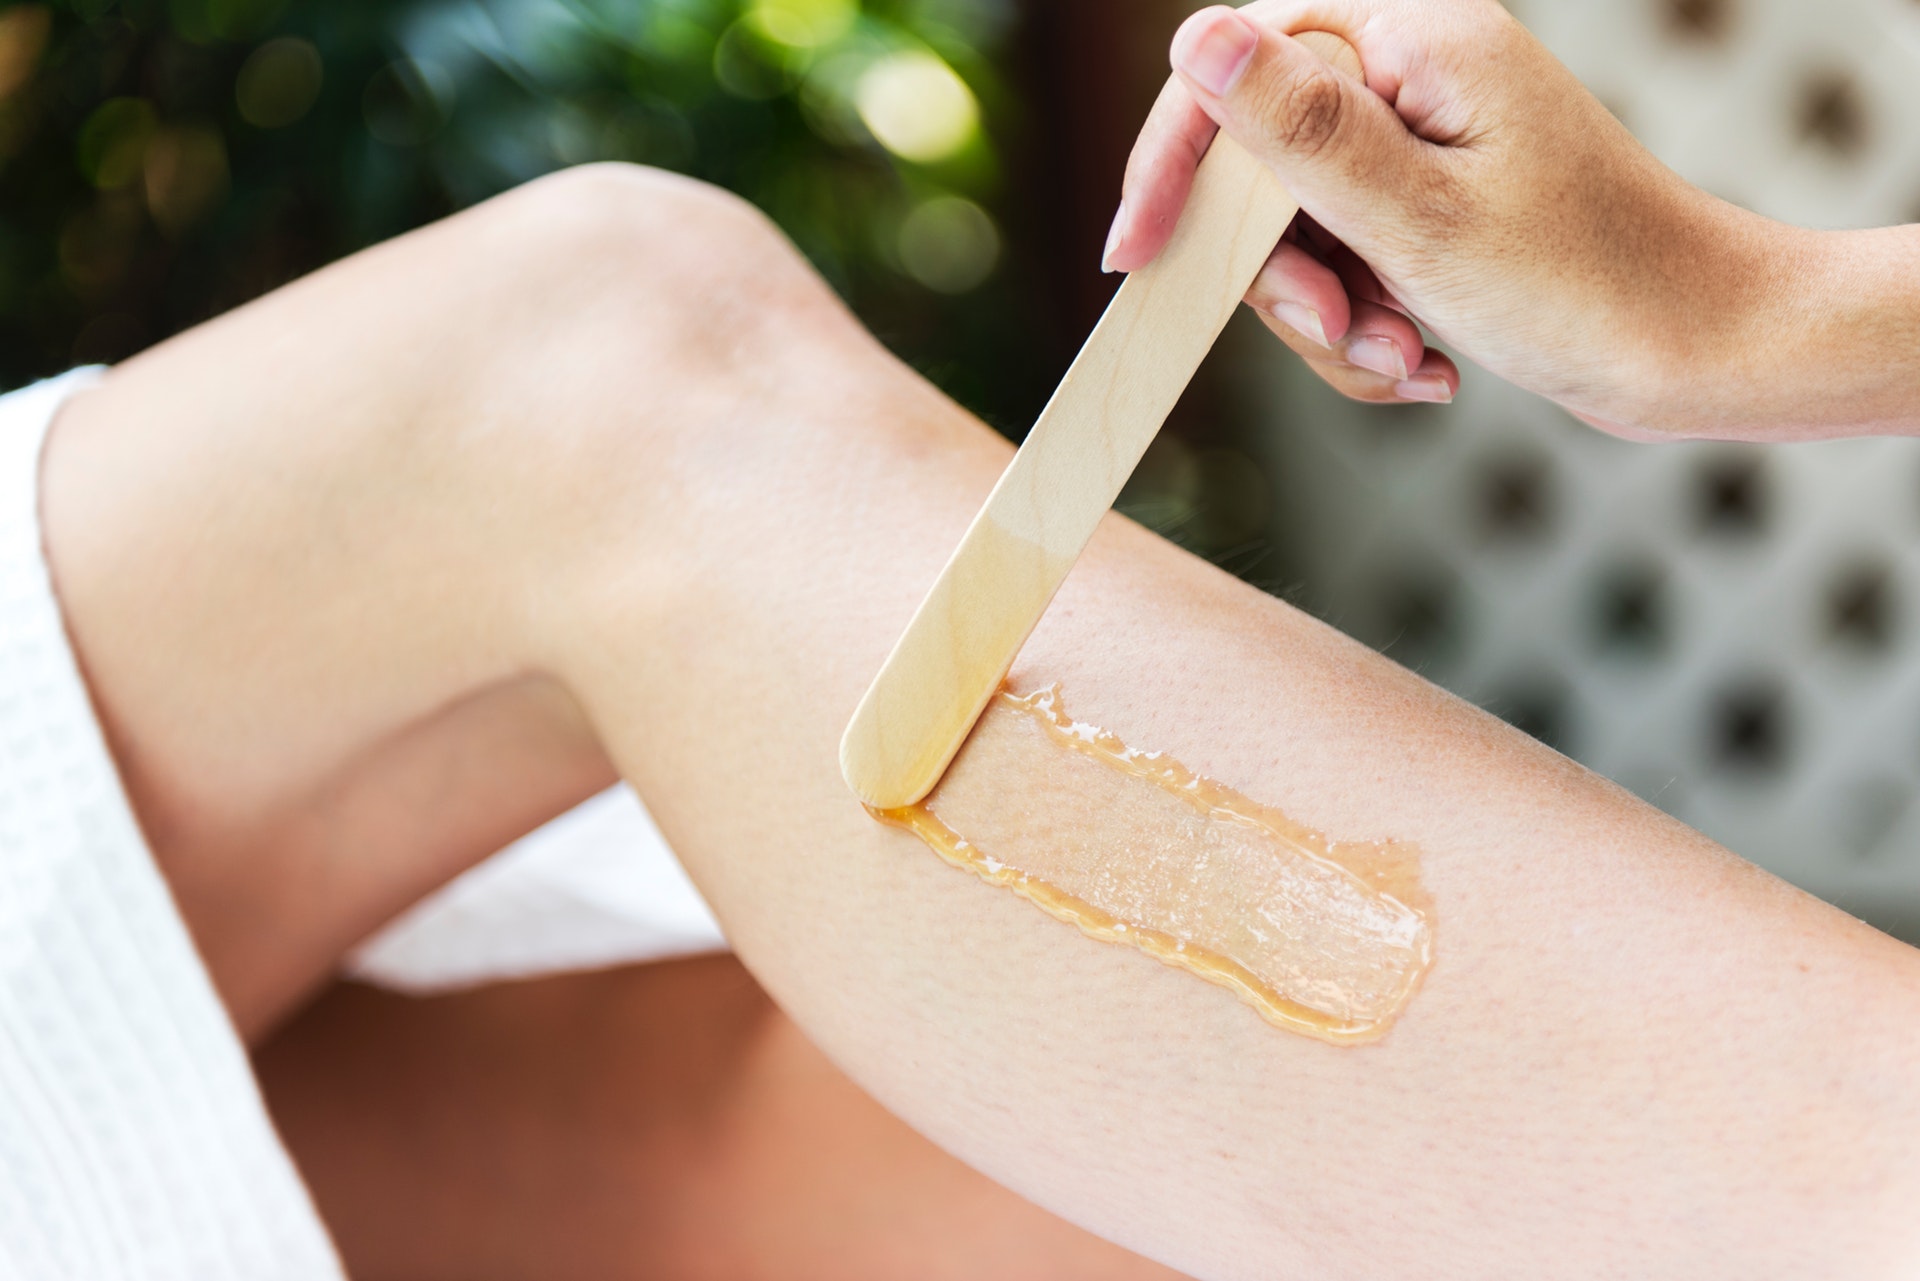 Hot wax being applied to woman's leg with wooden stick